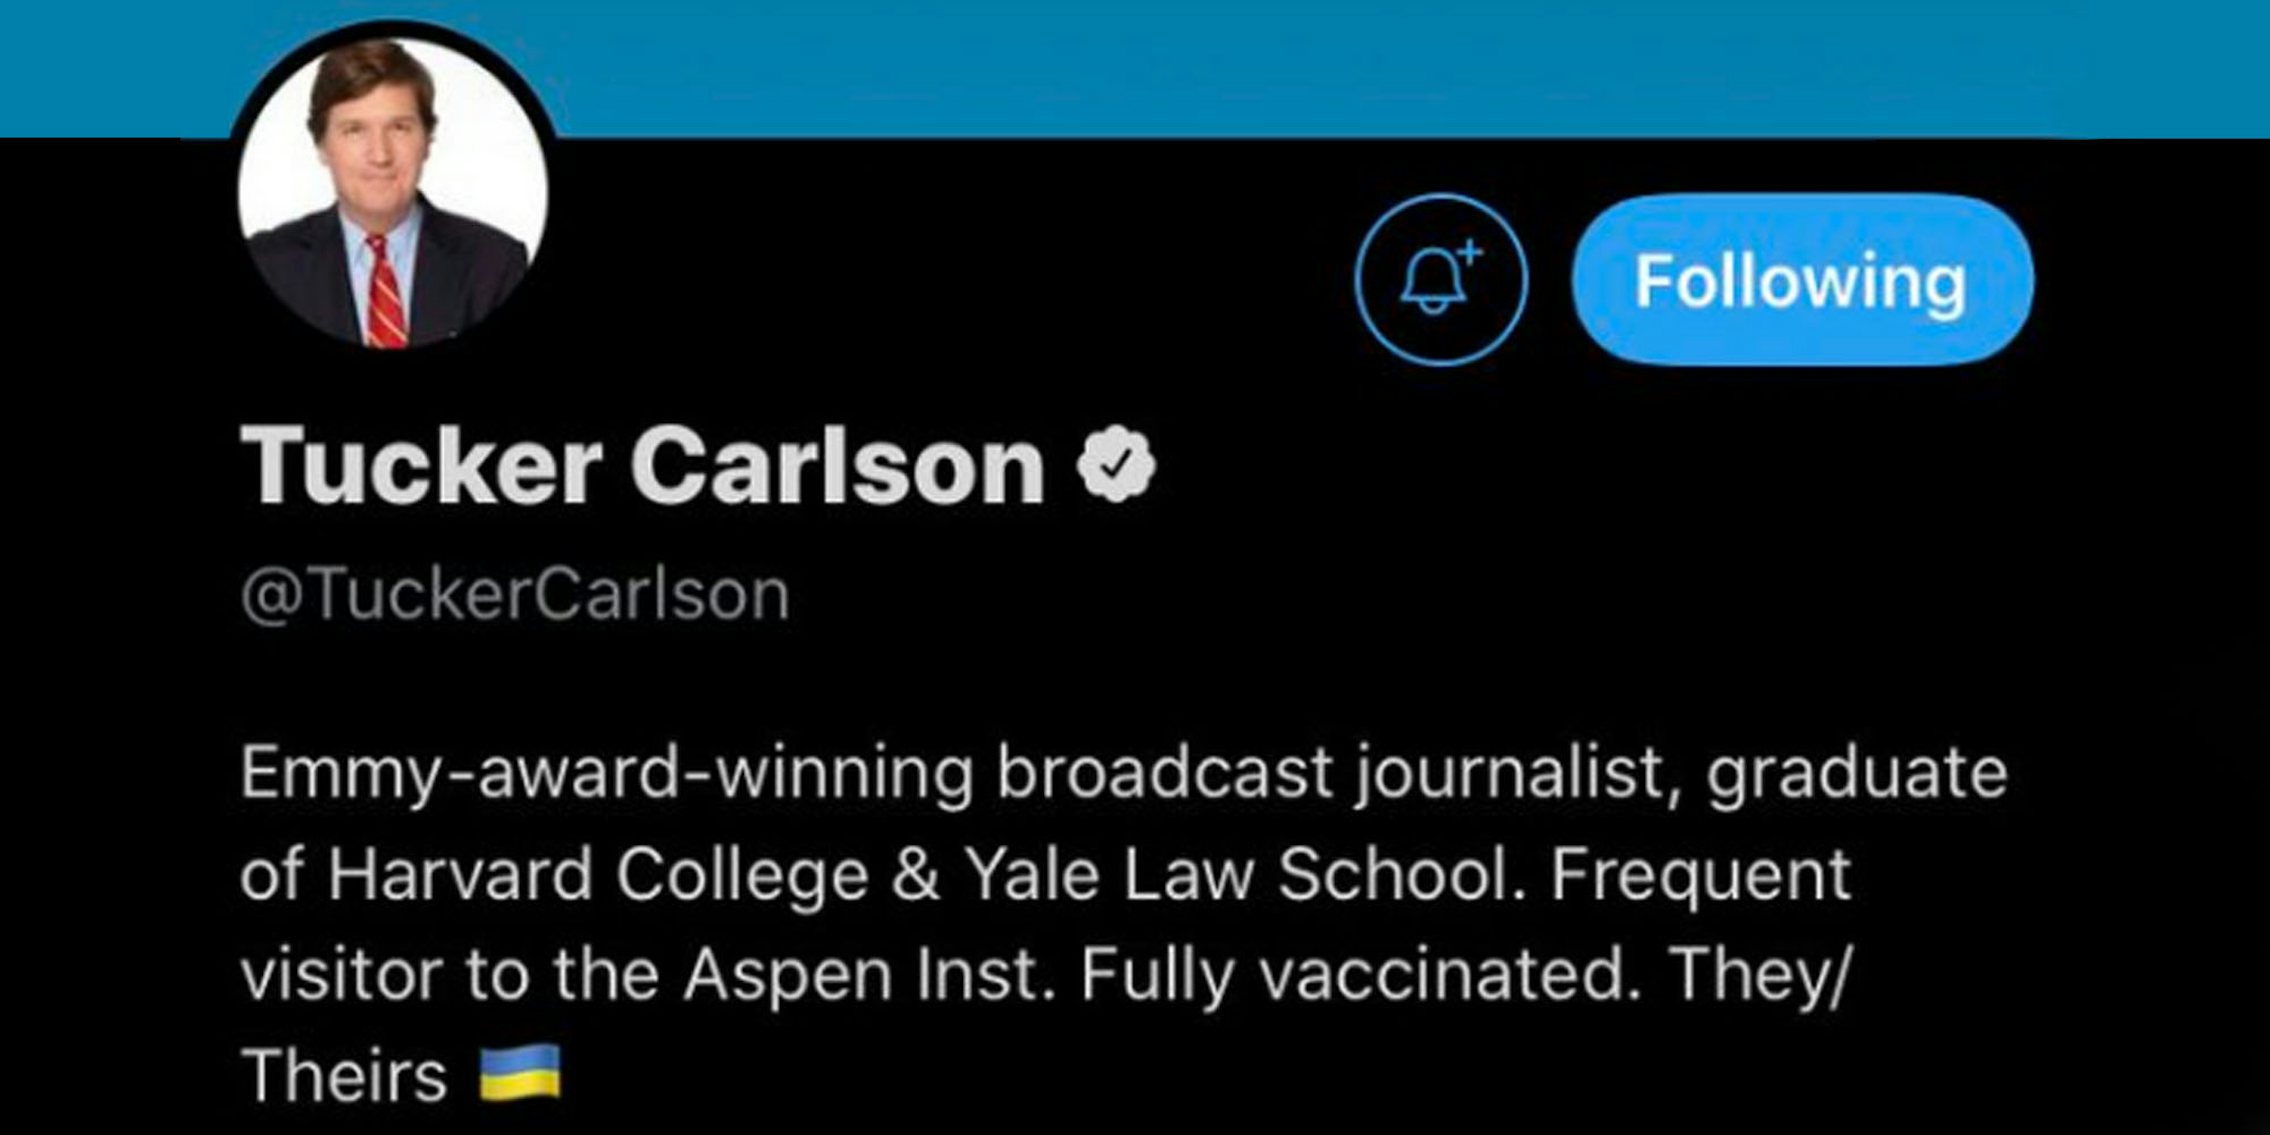 Tucker Carlson Twitter bio caption 'Emmy-award-winning broadcast journalist, graduate of Harvard College & Yale Law School. Frequent visitor to the Aspen Inst. Fully vaccinated. They/Theirs flag emoji'